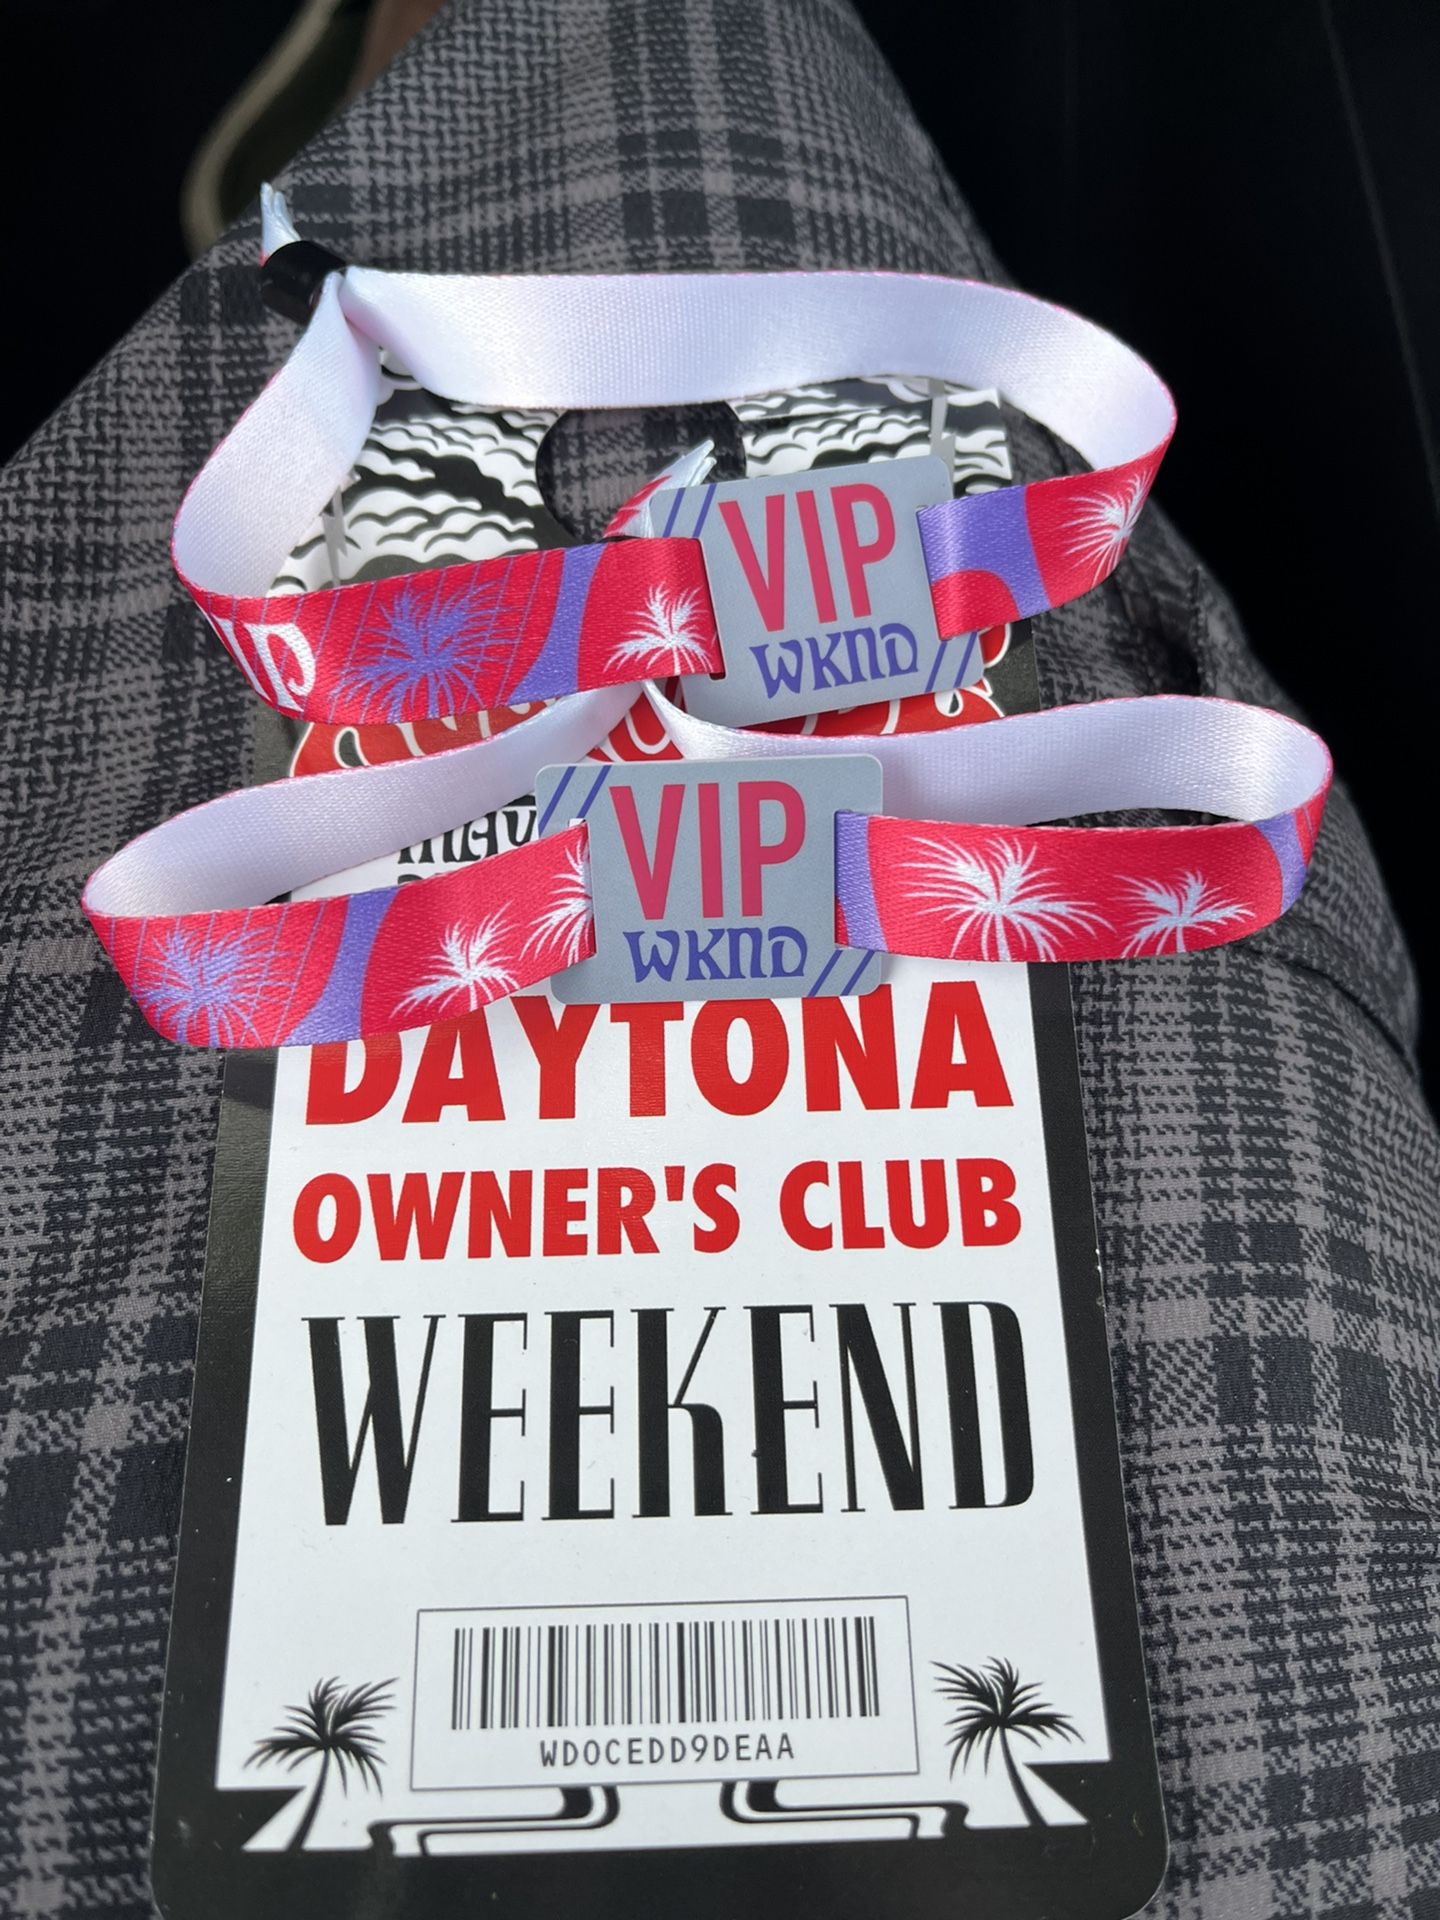 Welcome to Rockville Vip 4 Day weekend passes/tickets